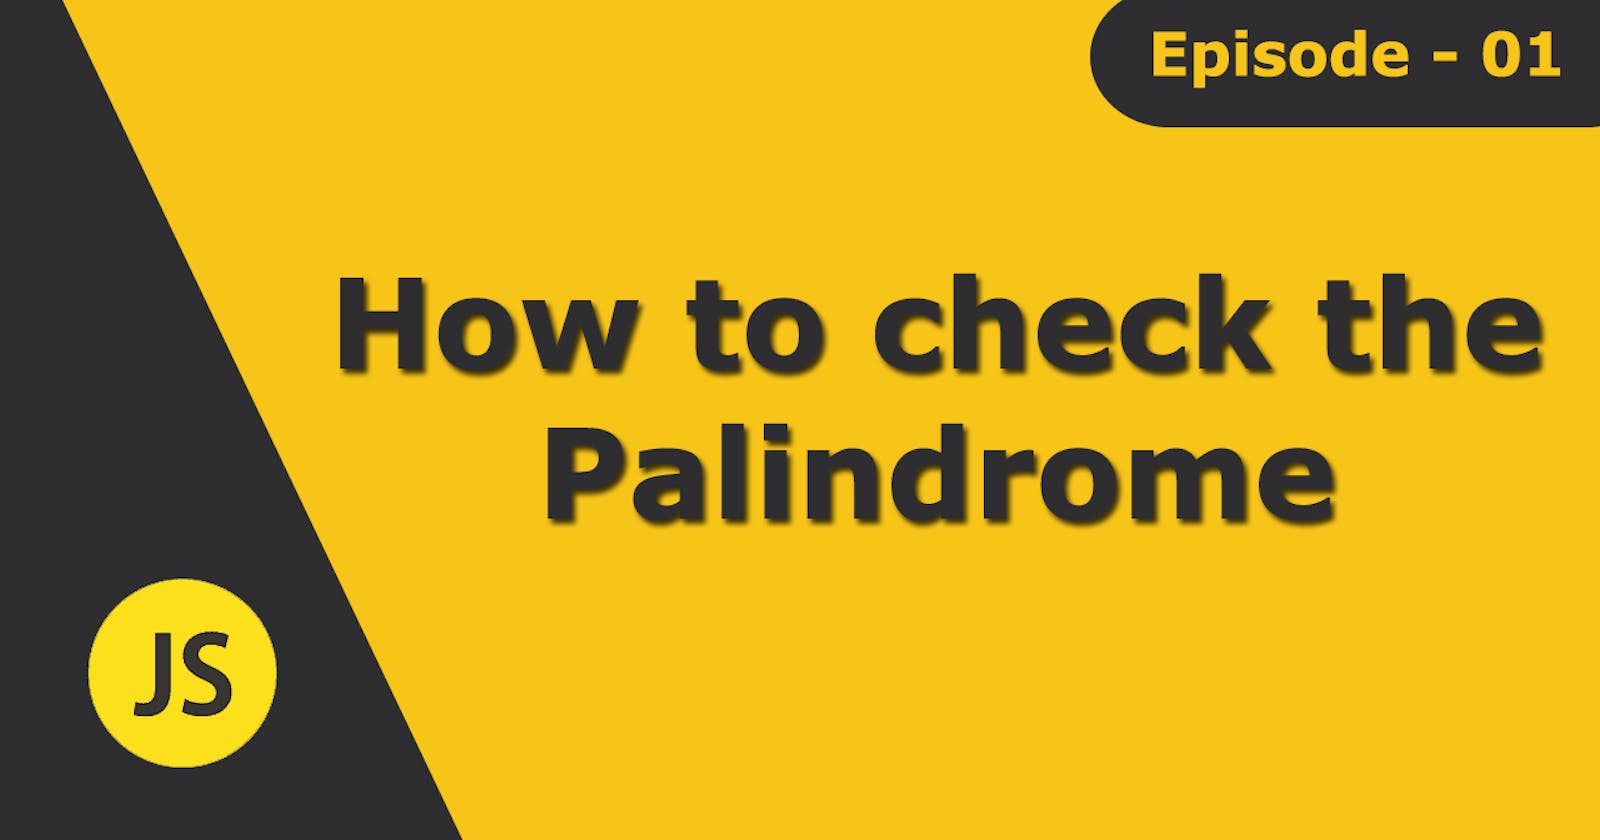 Episode 01 - How to check the Palindrome in JavaScript